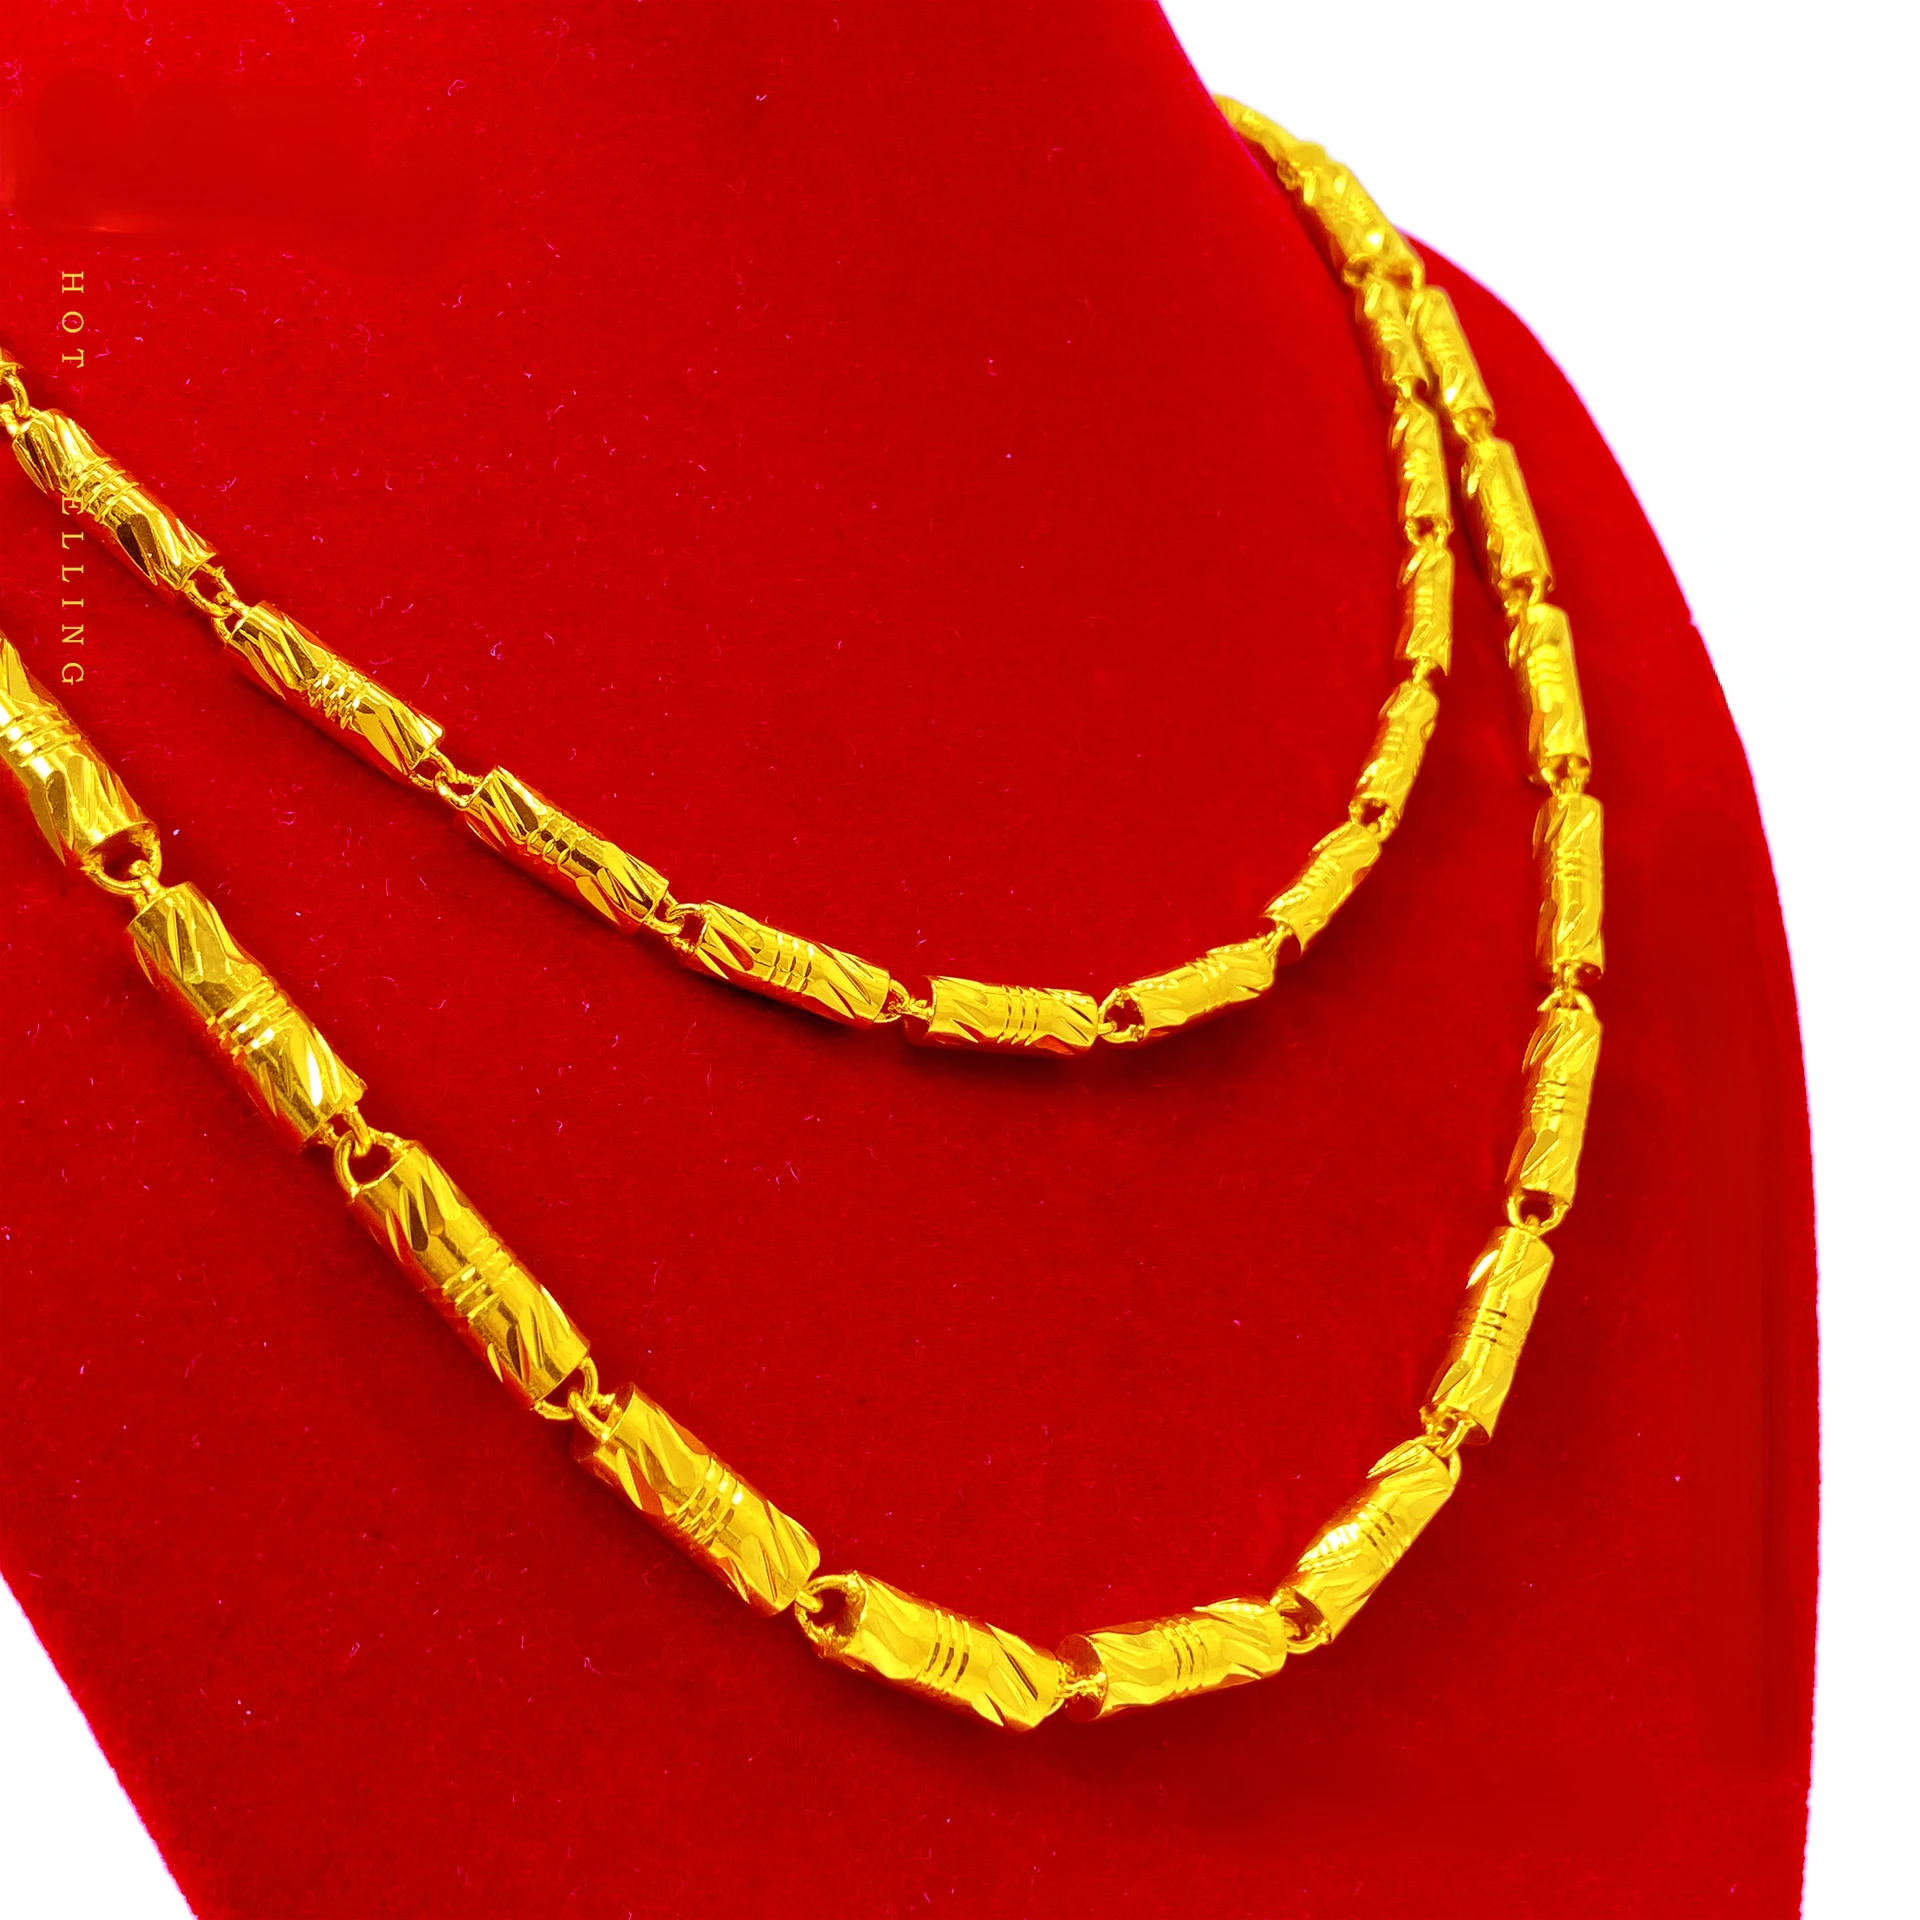 

Genuine Pure 24k Gold Color 5mm 6mm Wide Classic Men's Chain Necklace for Men Bro Father 60cm Necklaces Fine Jewelry Gifts